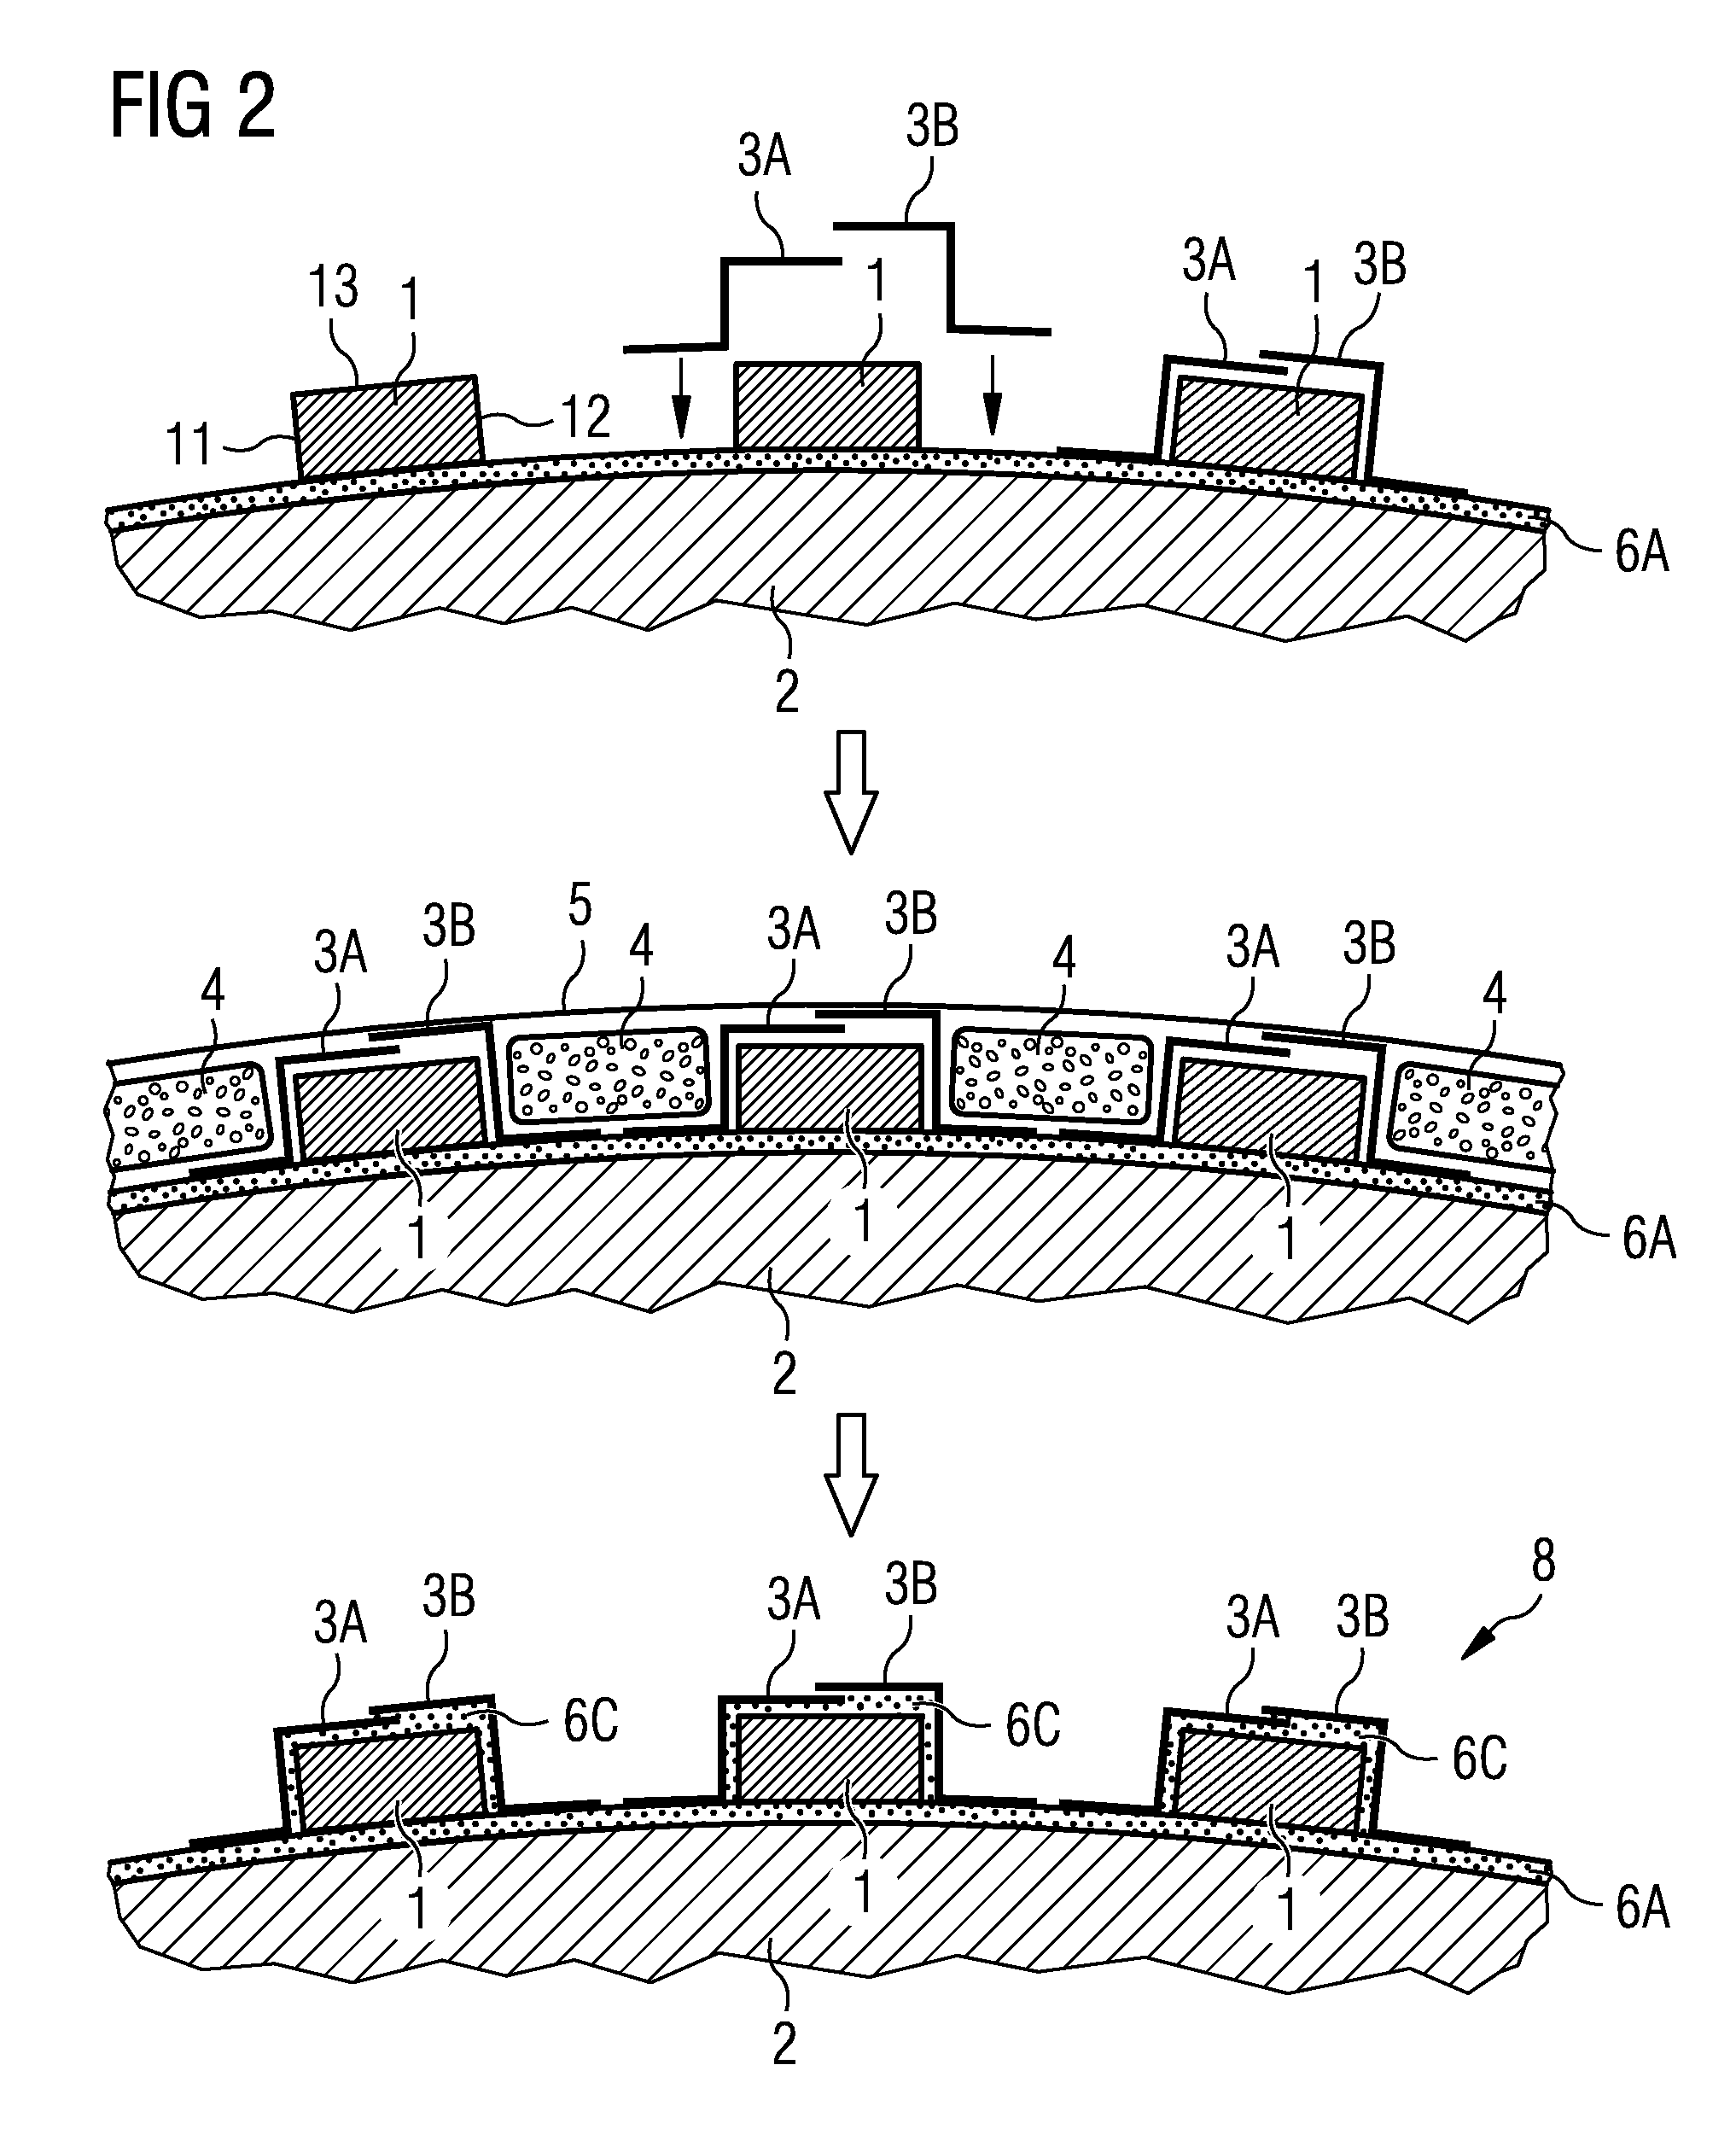 Method of attaching a magnet to a rotor or a stator of an electrical machine